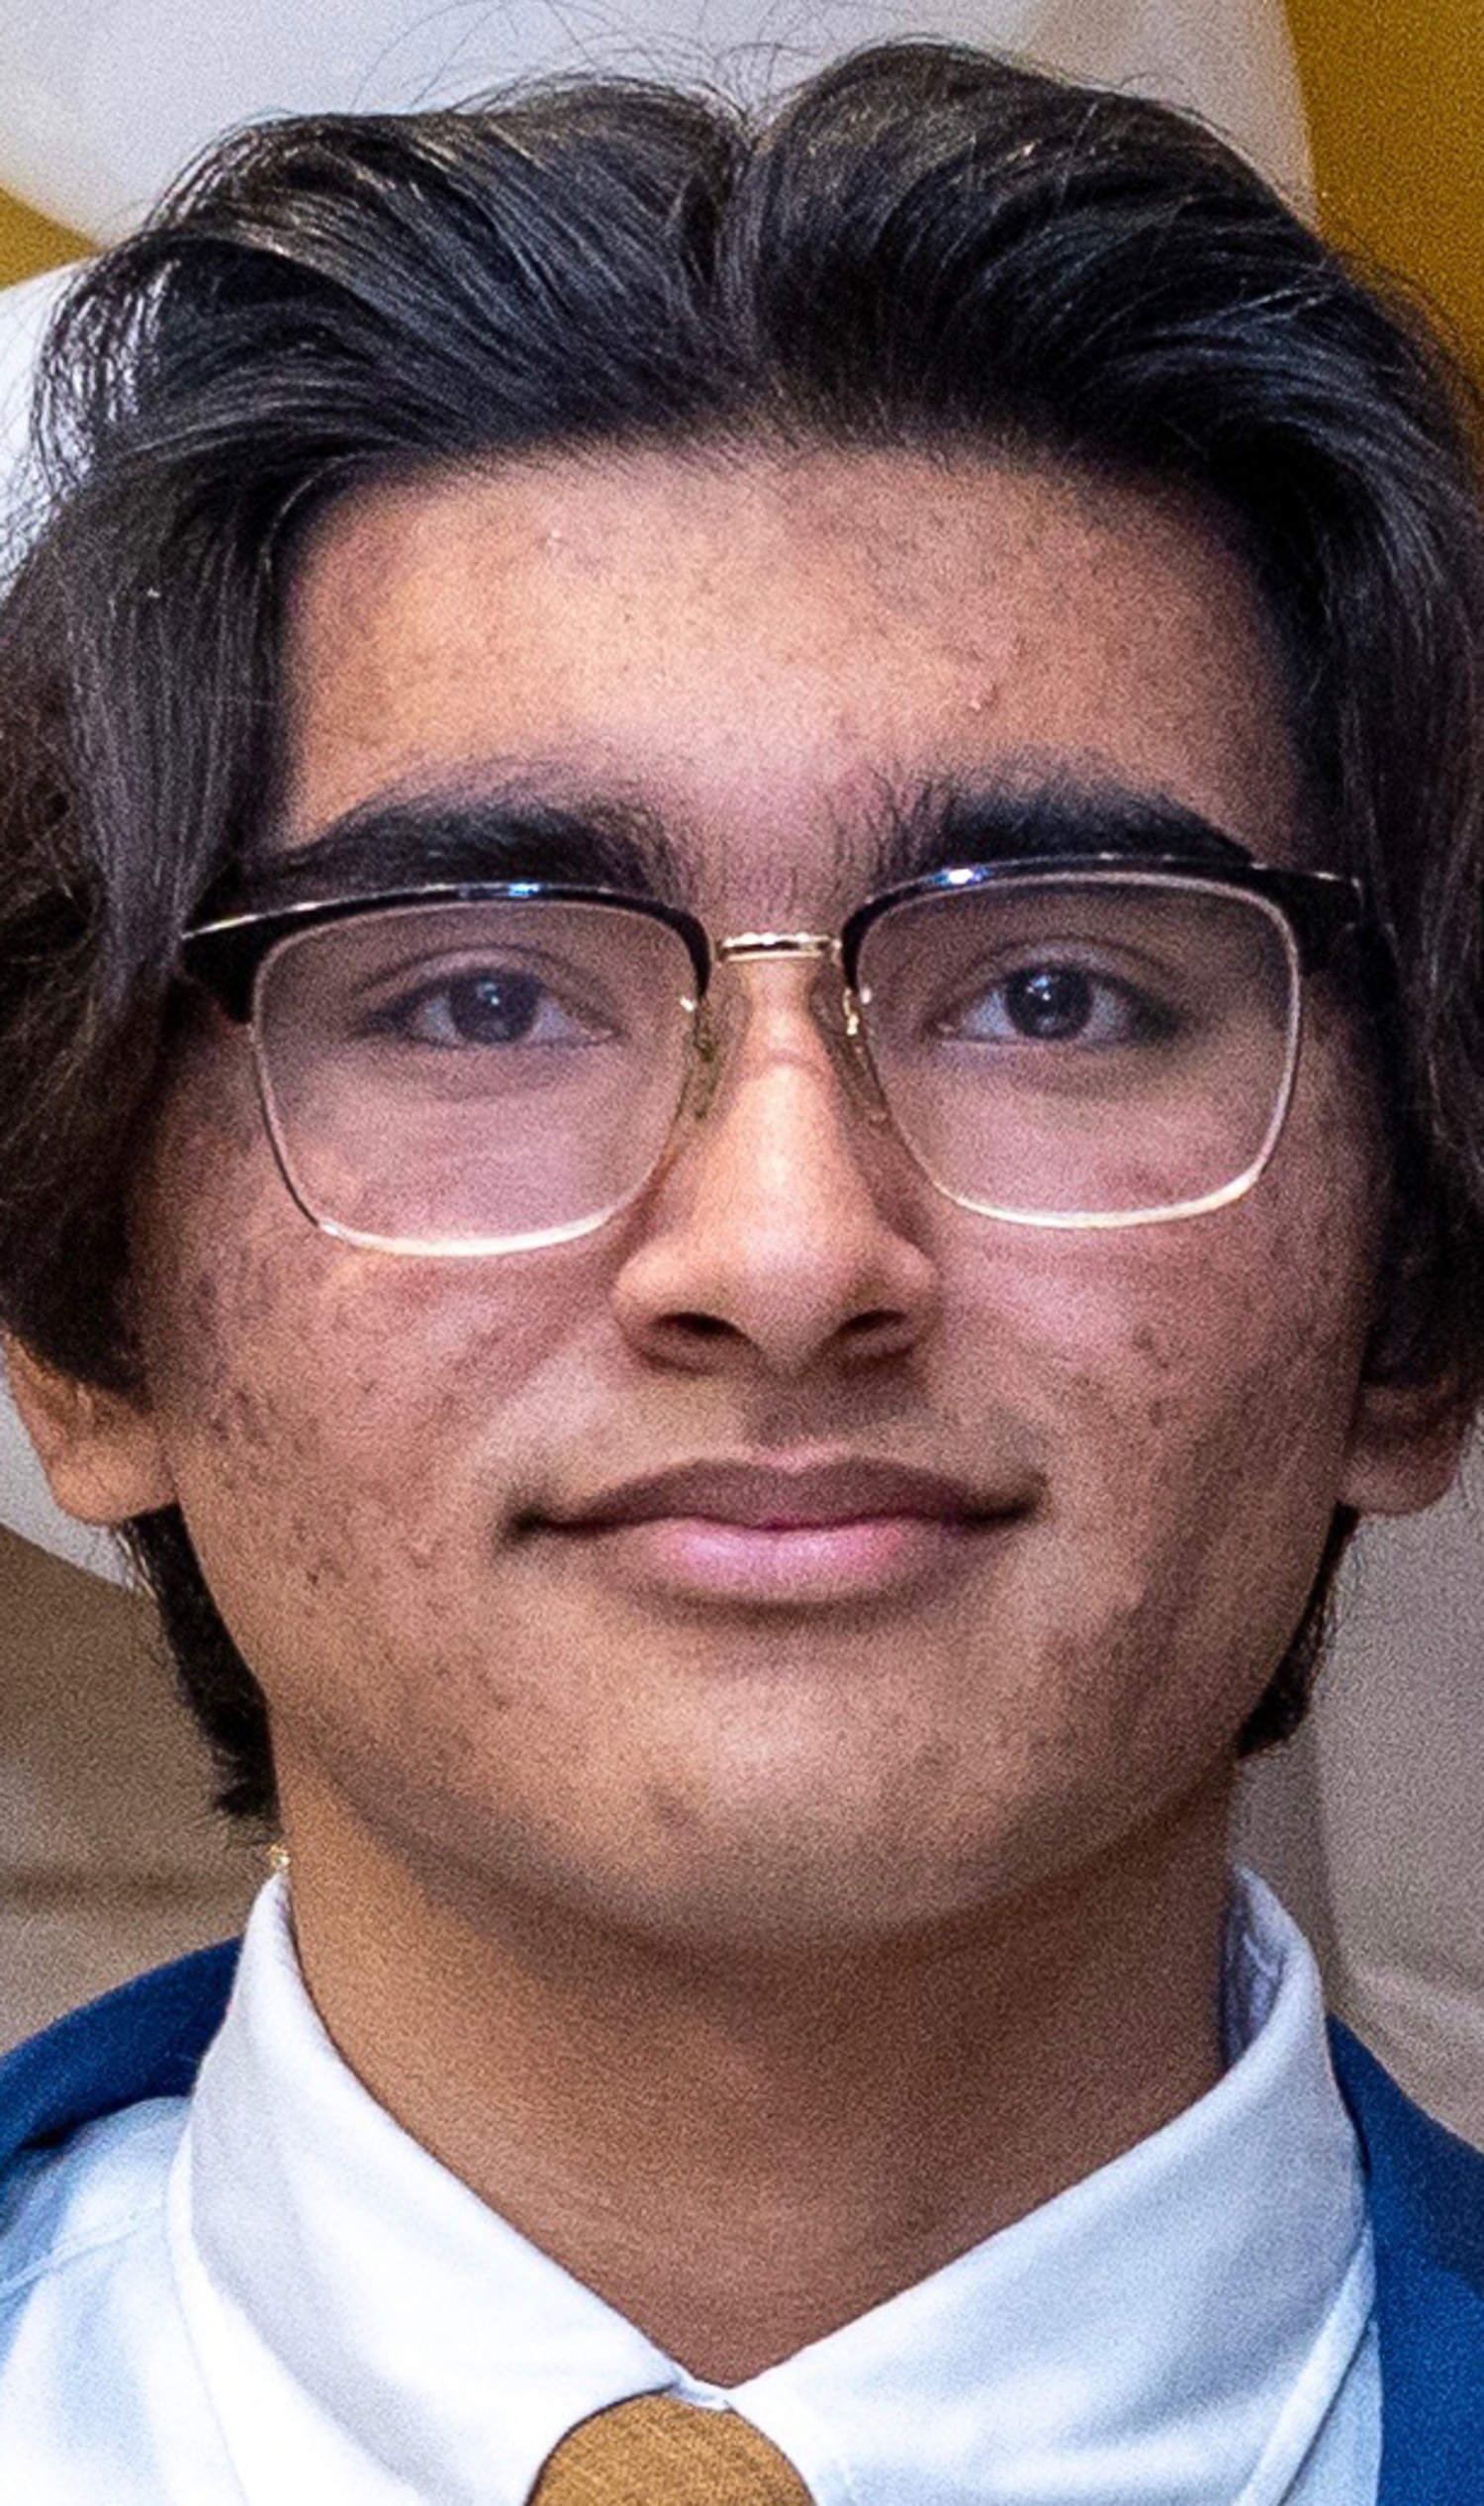 Indian American student died of hypothermia on University of Illinois campus, coroner says